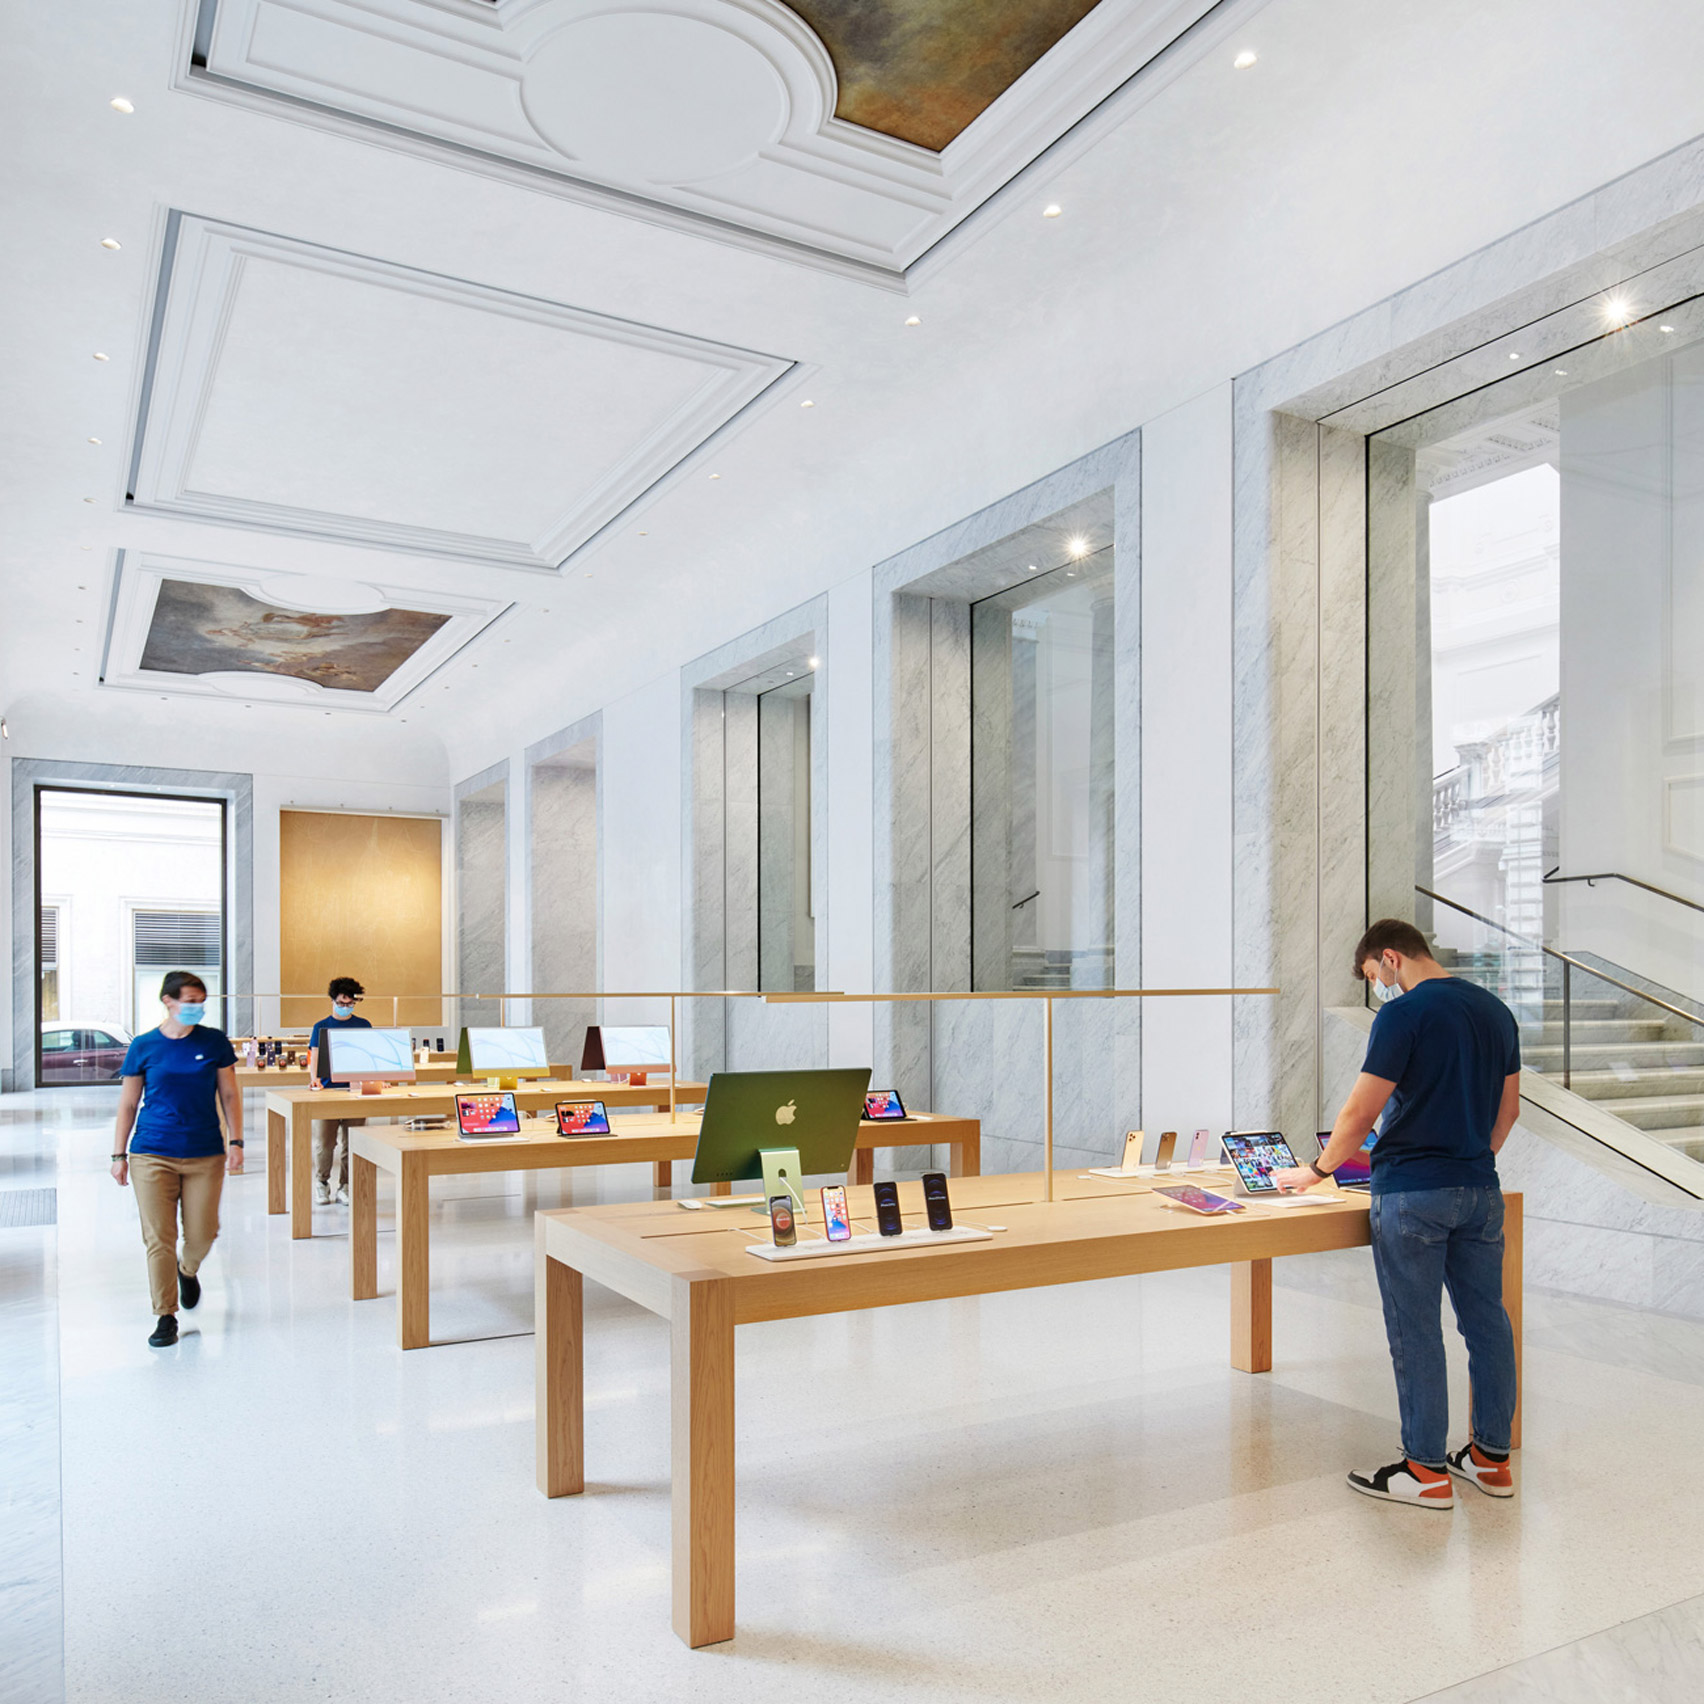 The Apple Store has marble interiors